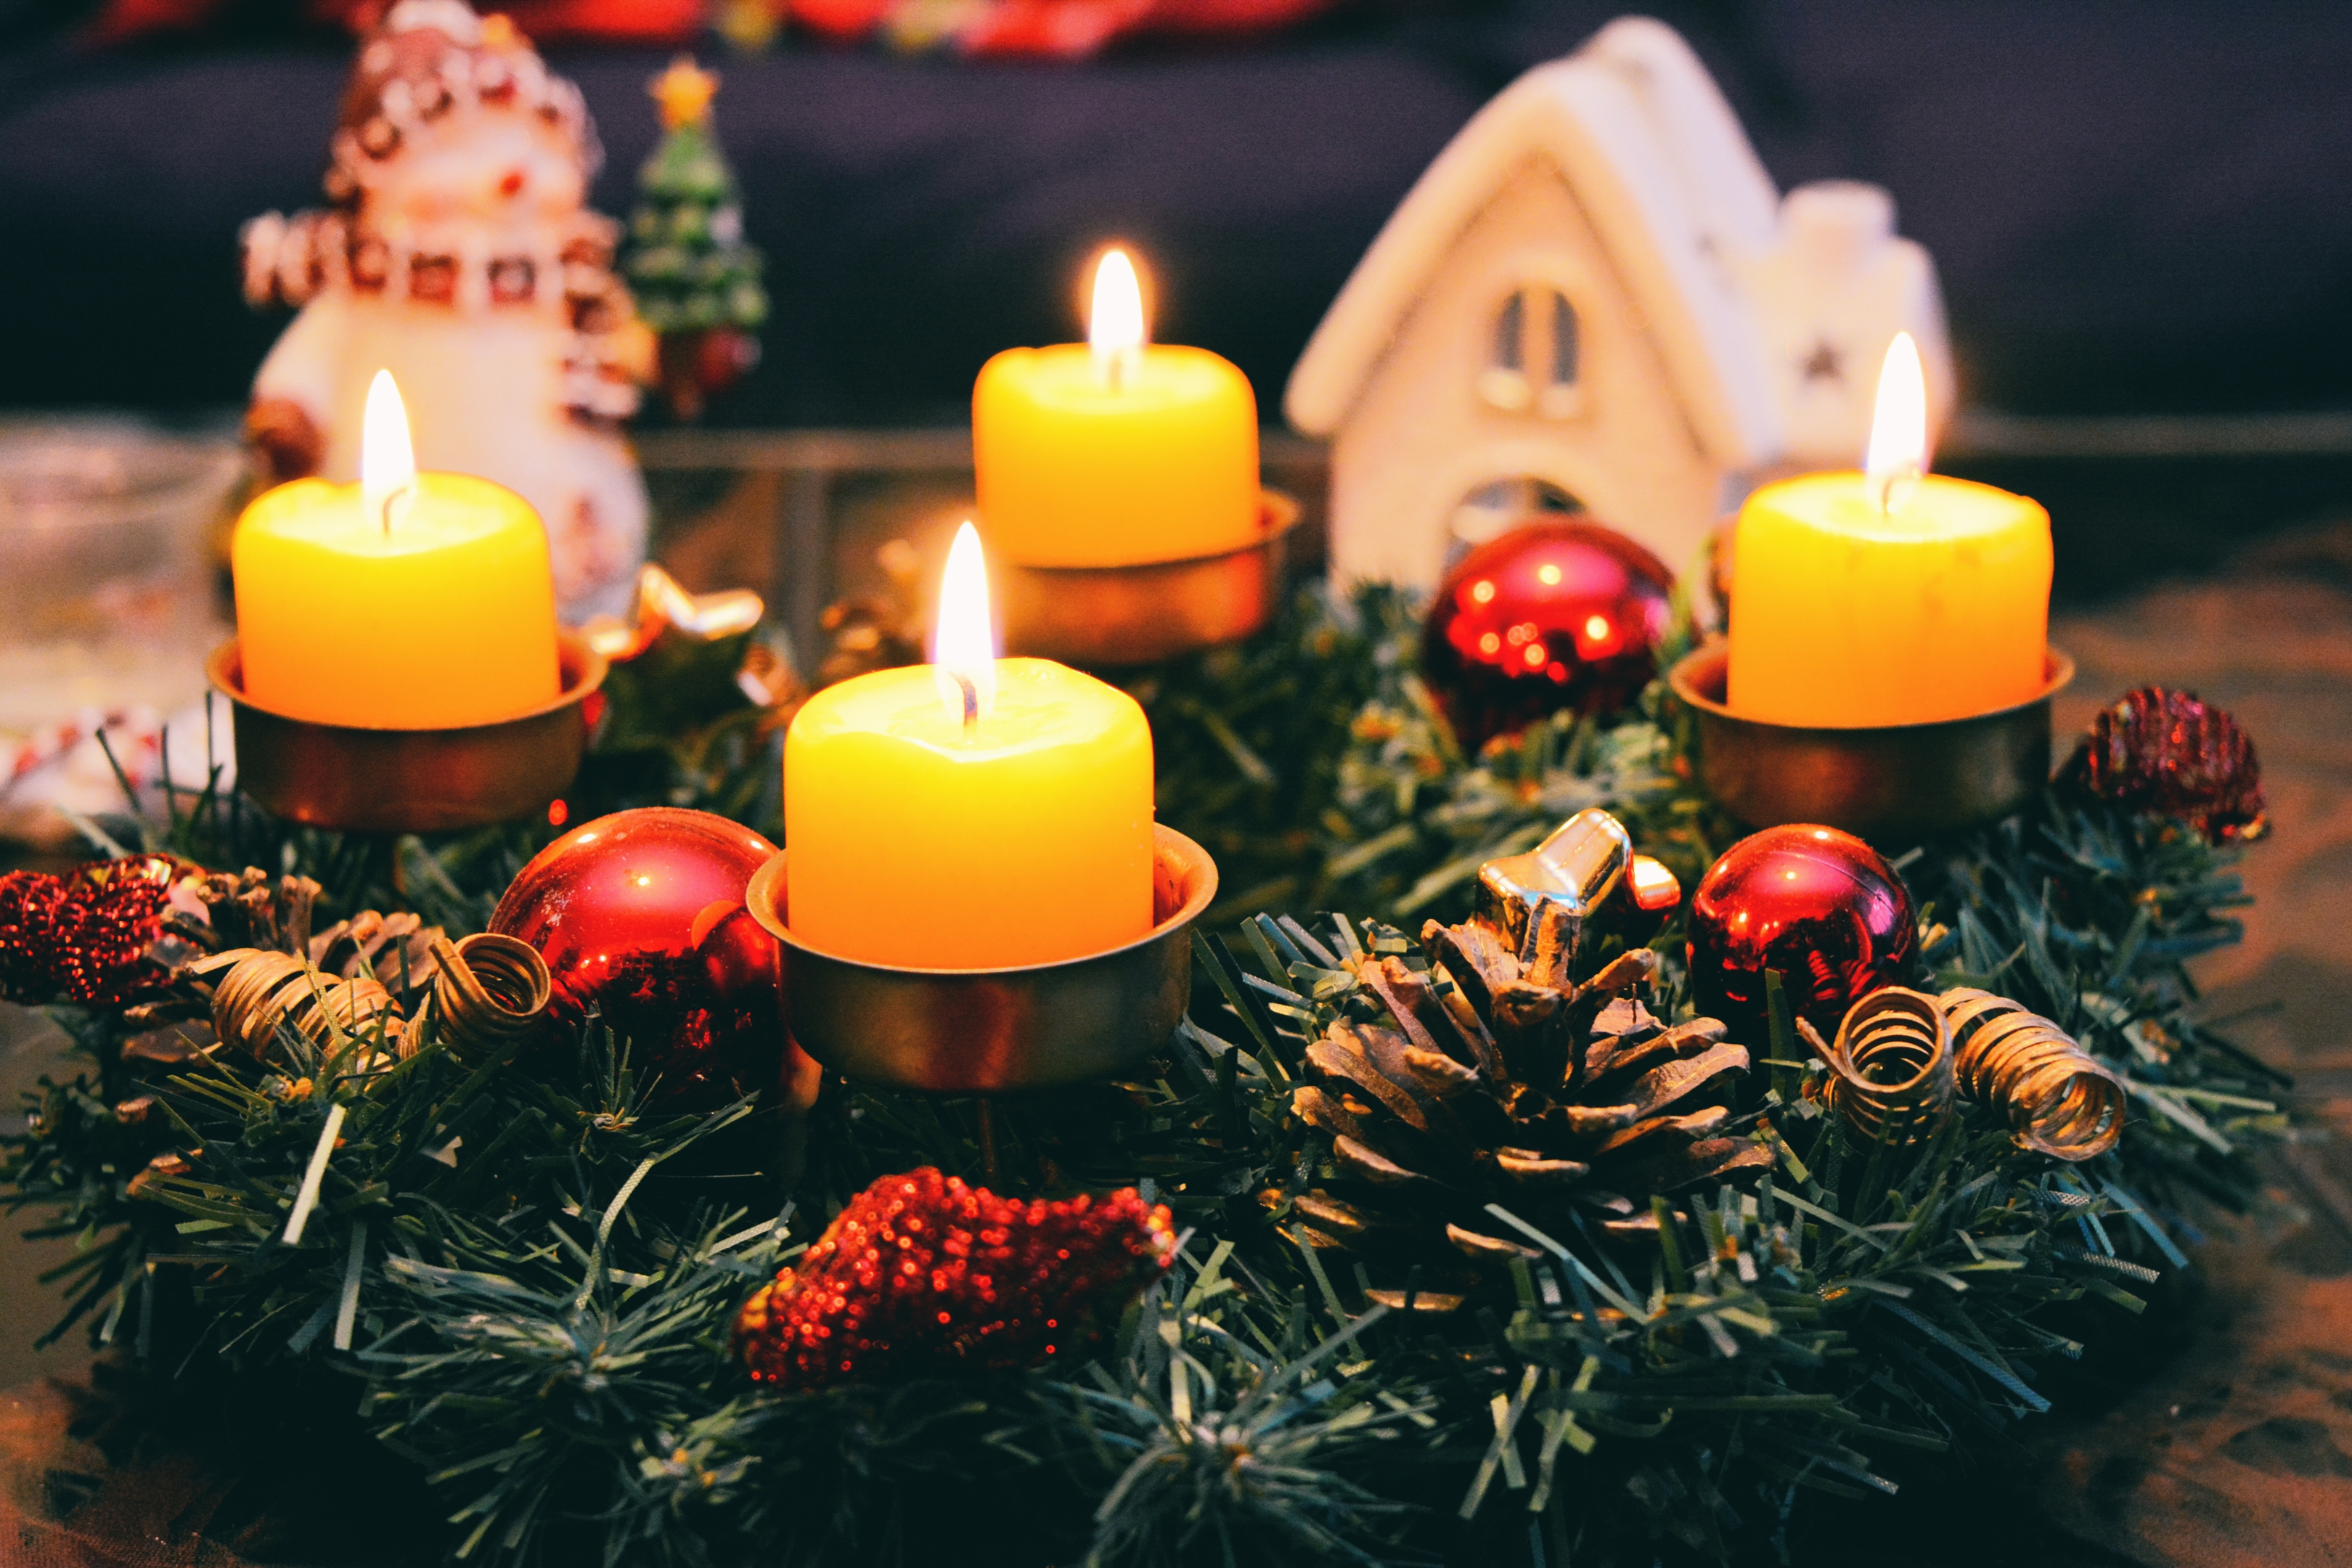 holiday fire safety tips philippines, fire safety christmas, holiday home safety tips, ofw property investment, ofw property, ofw real estate